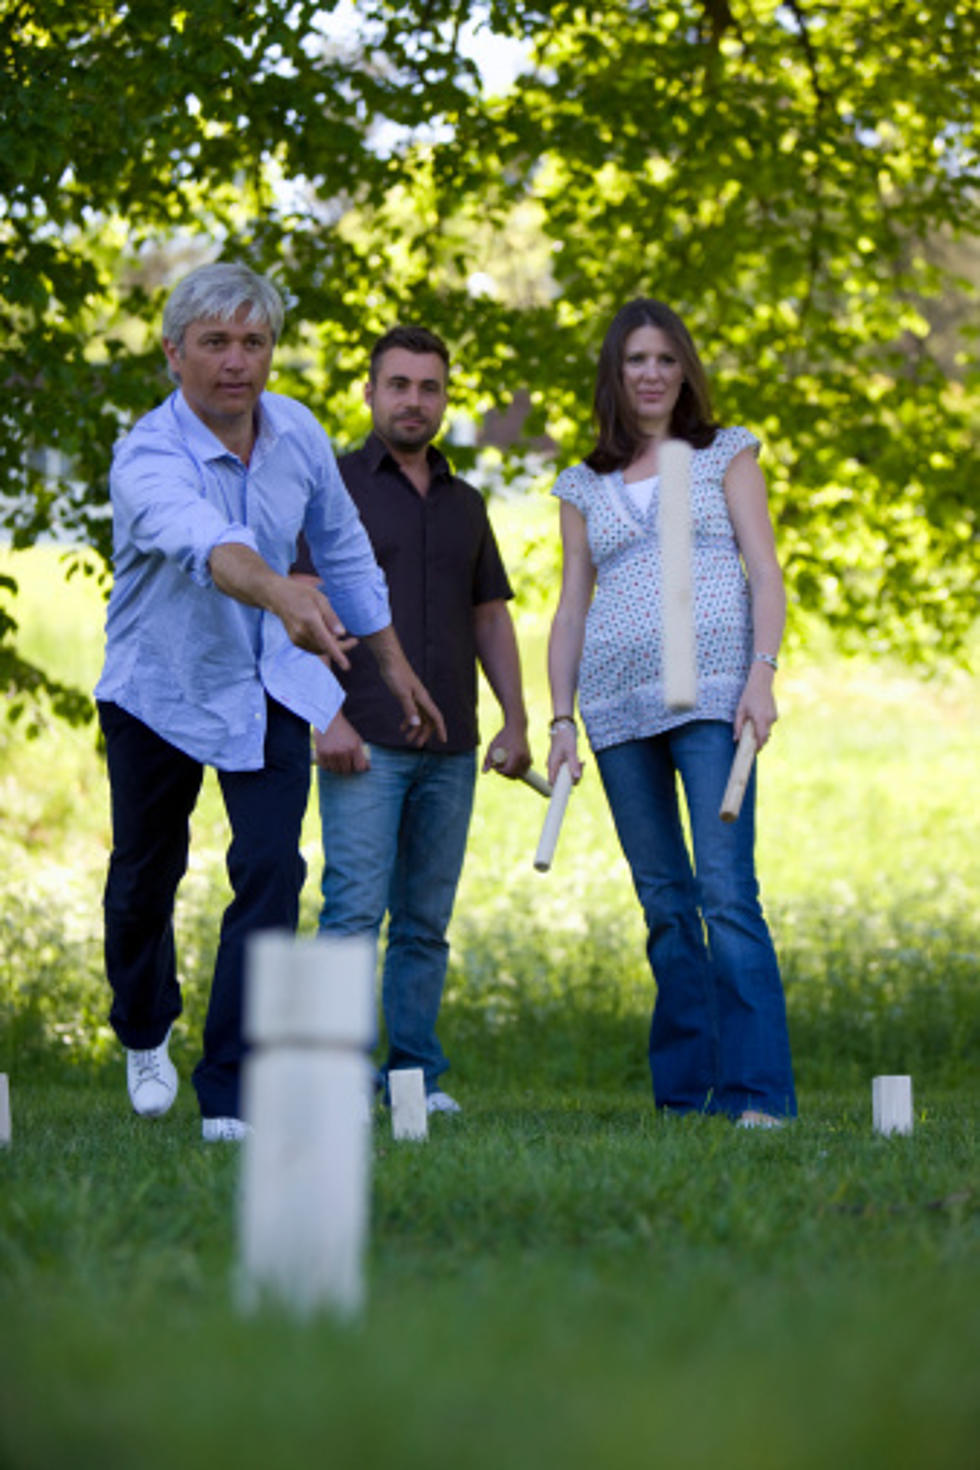 It’s a Beautiful Weekend For a Kubb Game